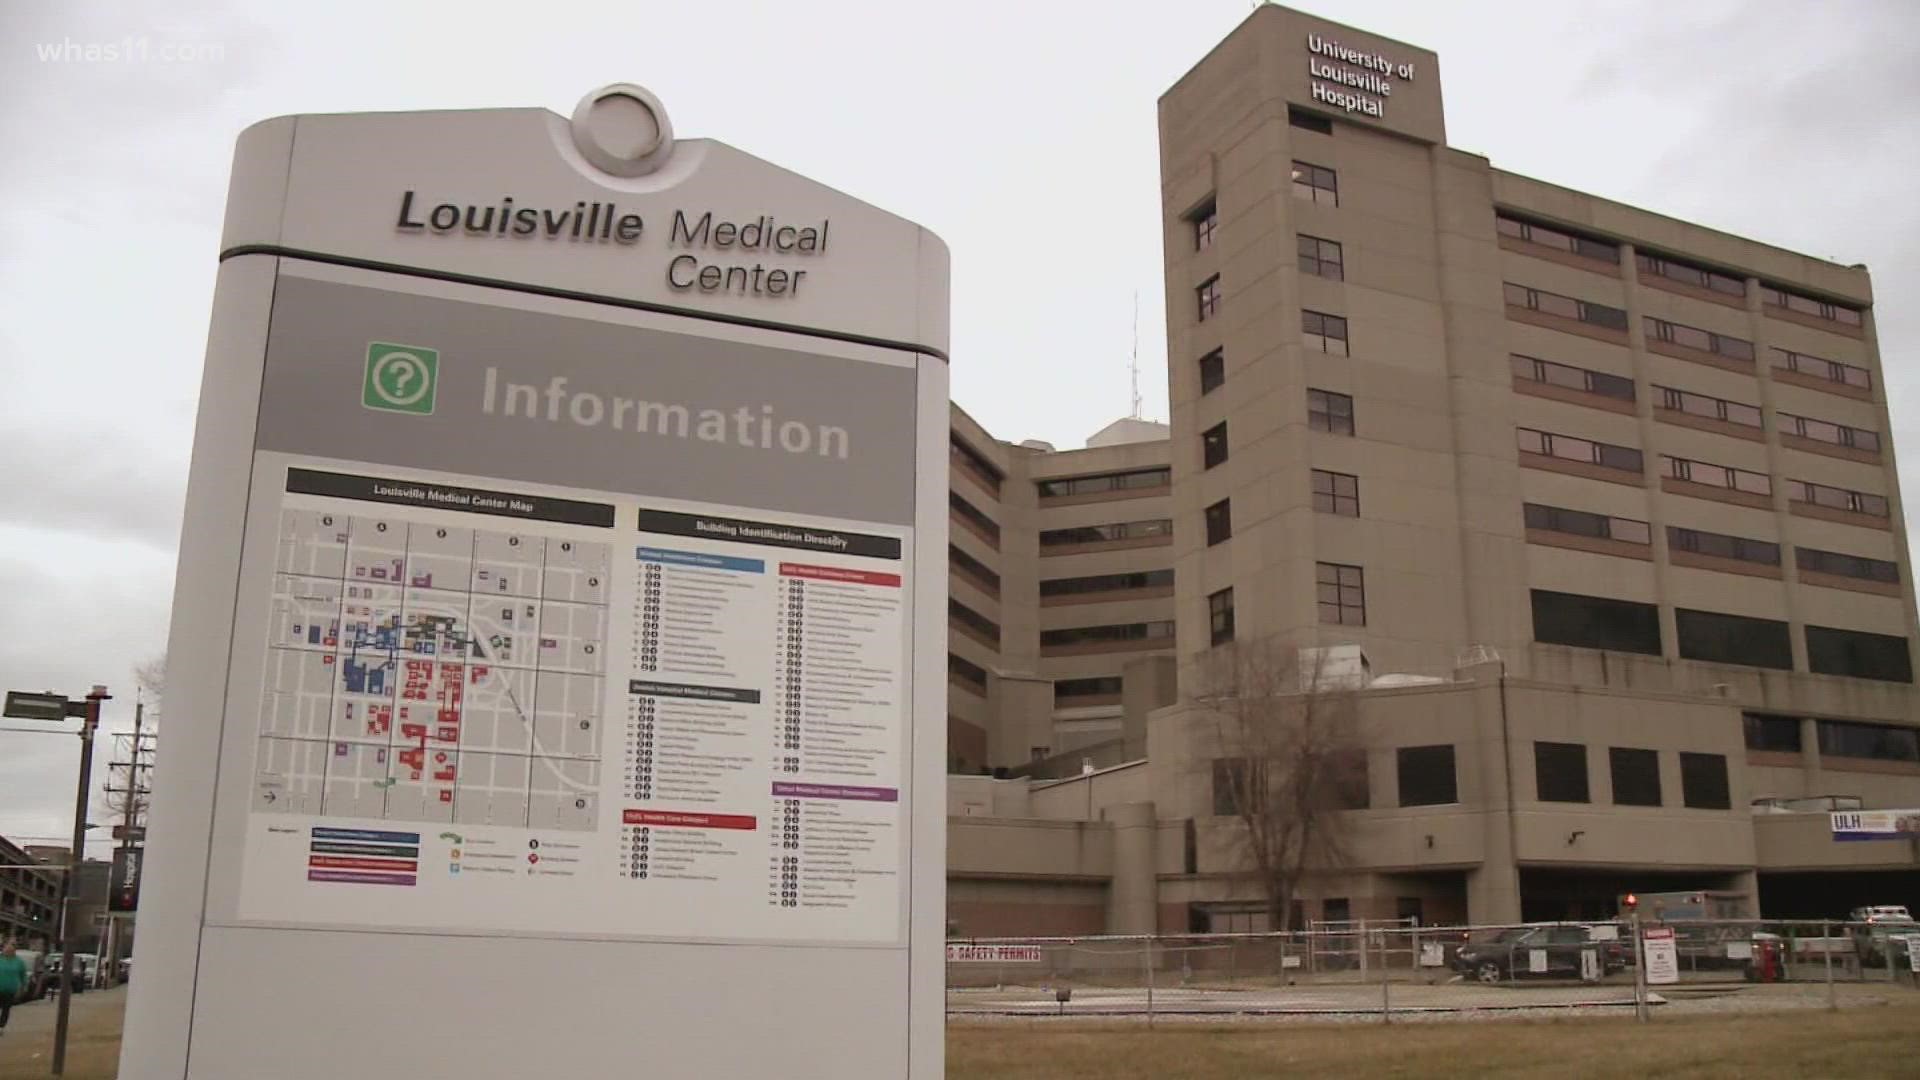 Chief medical officers from Norton, UofL Health, Baptist Health said if things don't change when it comes to vaccinations, they will hit record COVID numbers.